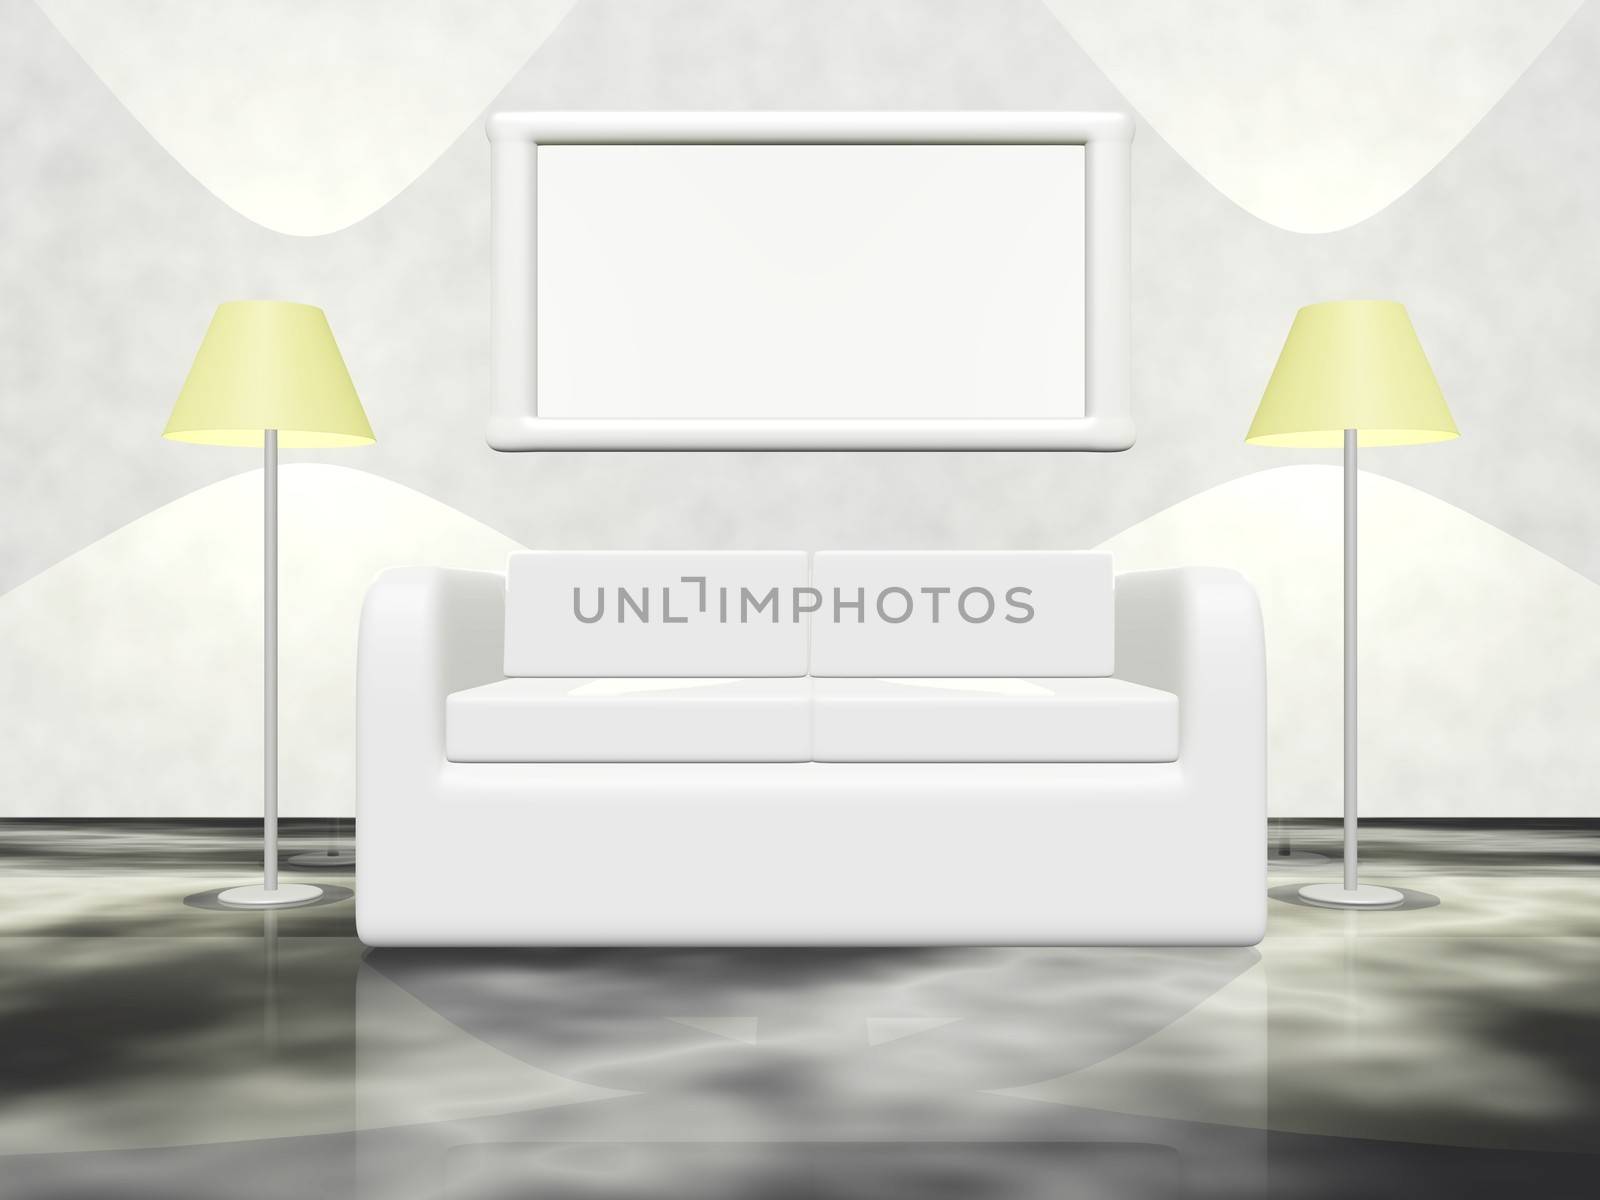 A 3d lounge scene with a white sofa couch placed amidst two tall lamps and against a wall with a blank picture frame
